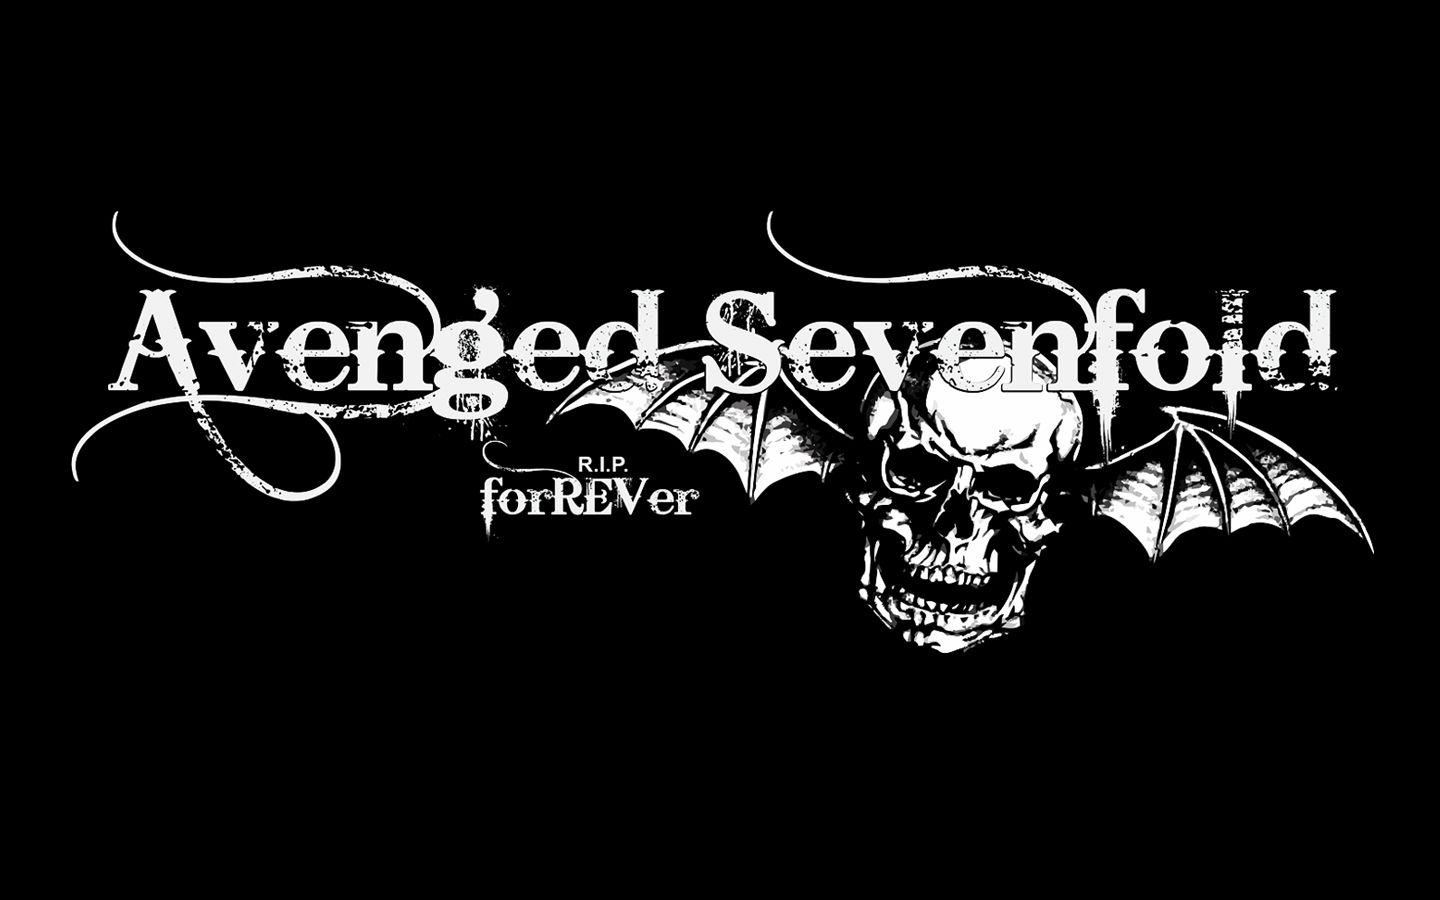 Avenged Sevenfold A7X Logo - Avenged Sevenfold image A7X FoREVer HD wallpaper and background